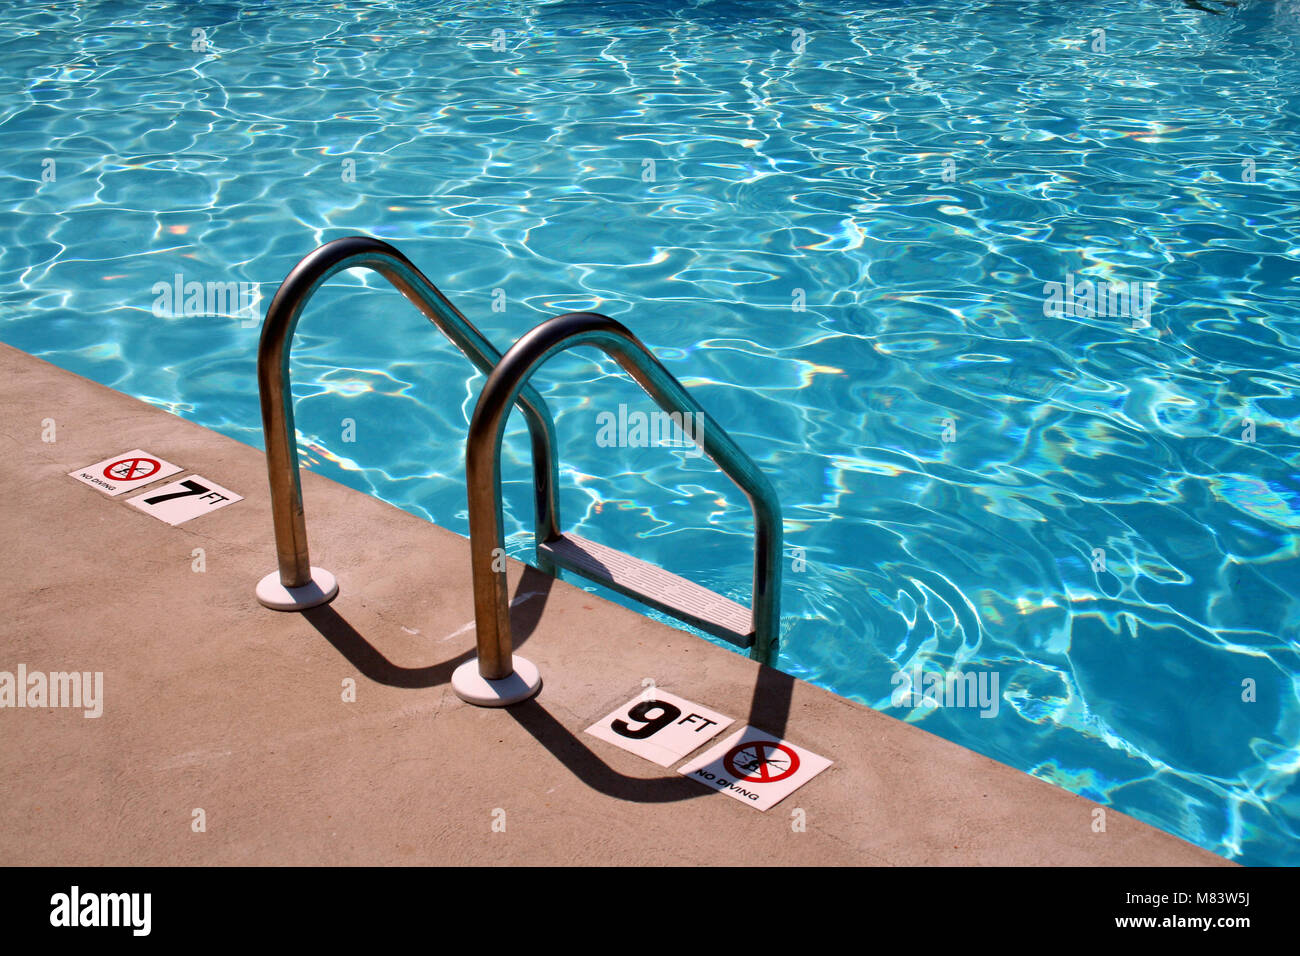 an image of a Swimming pool Ladder Stock Photo